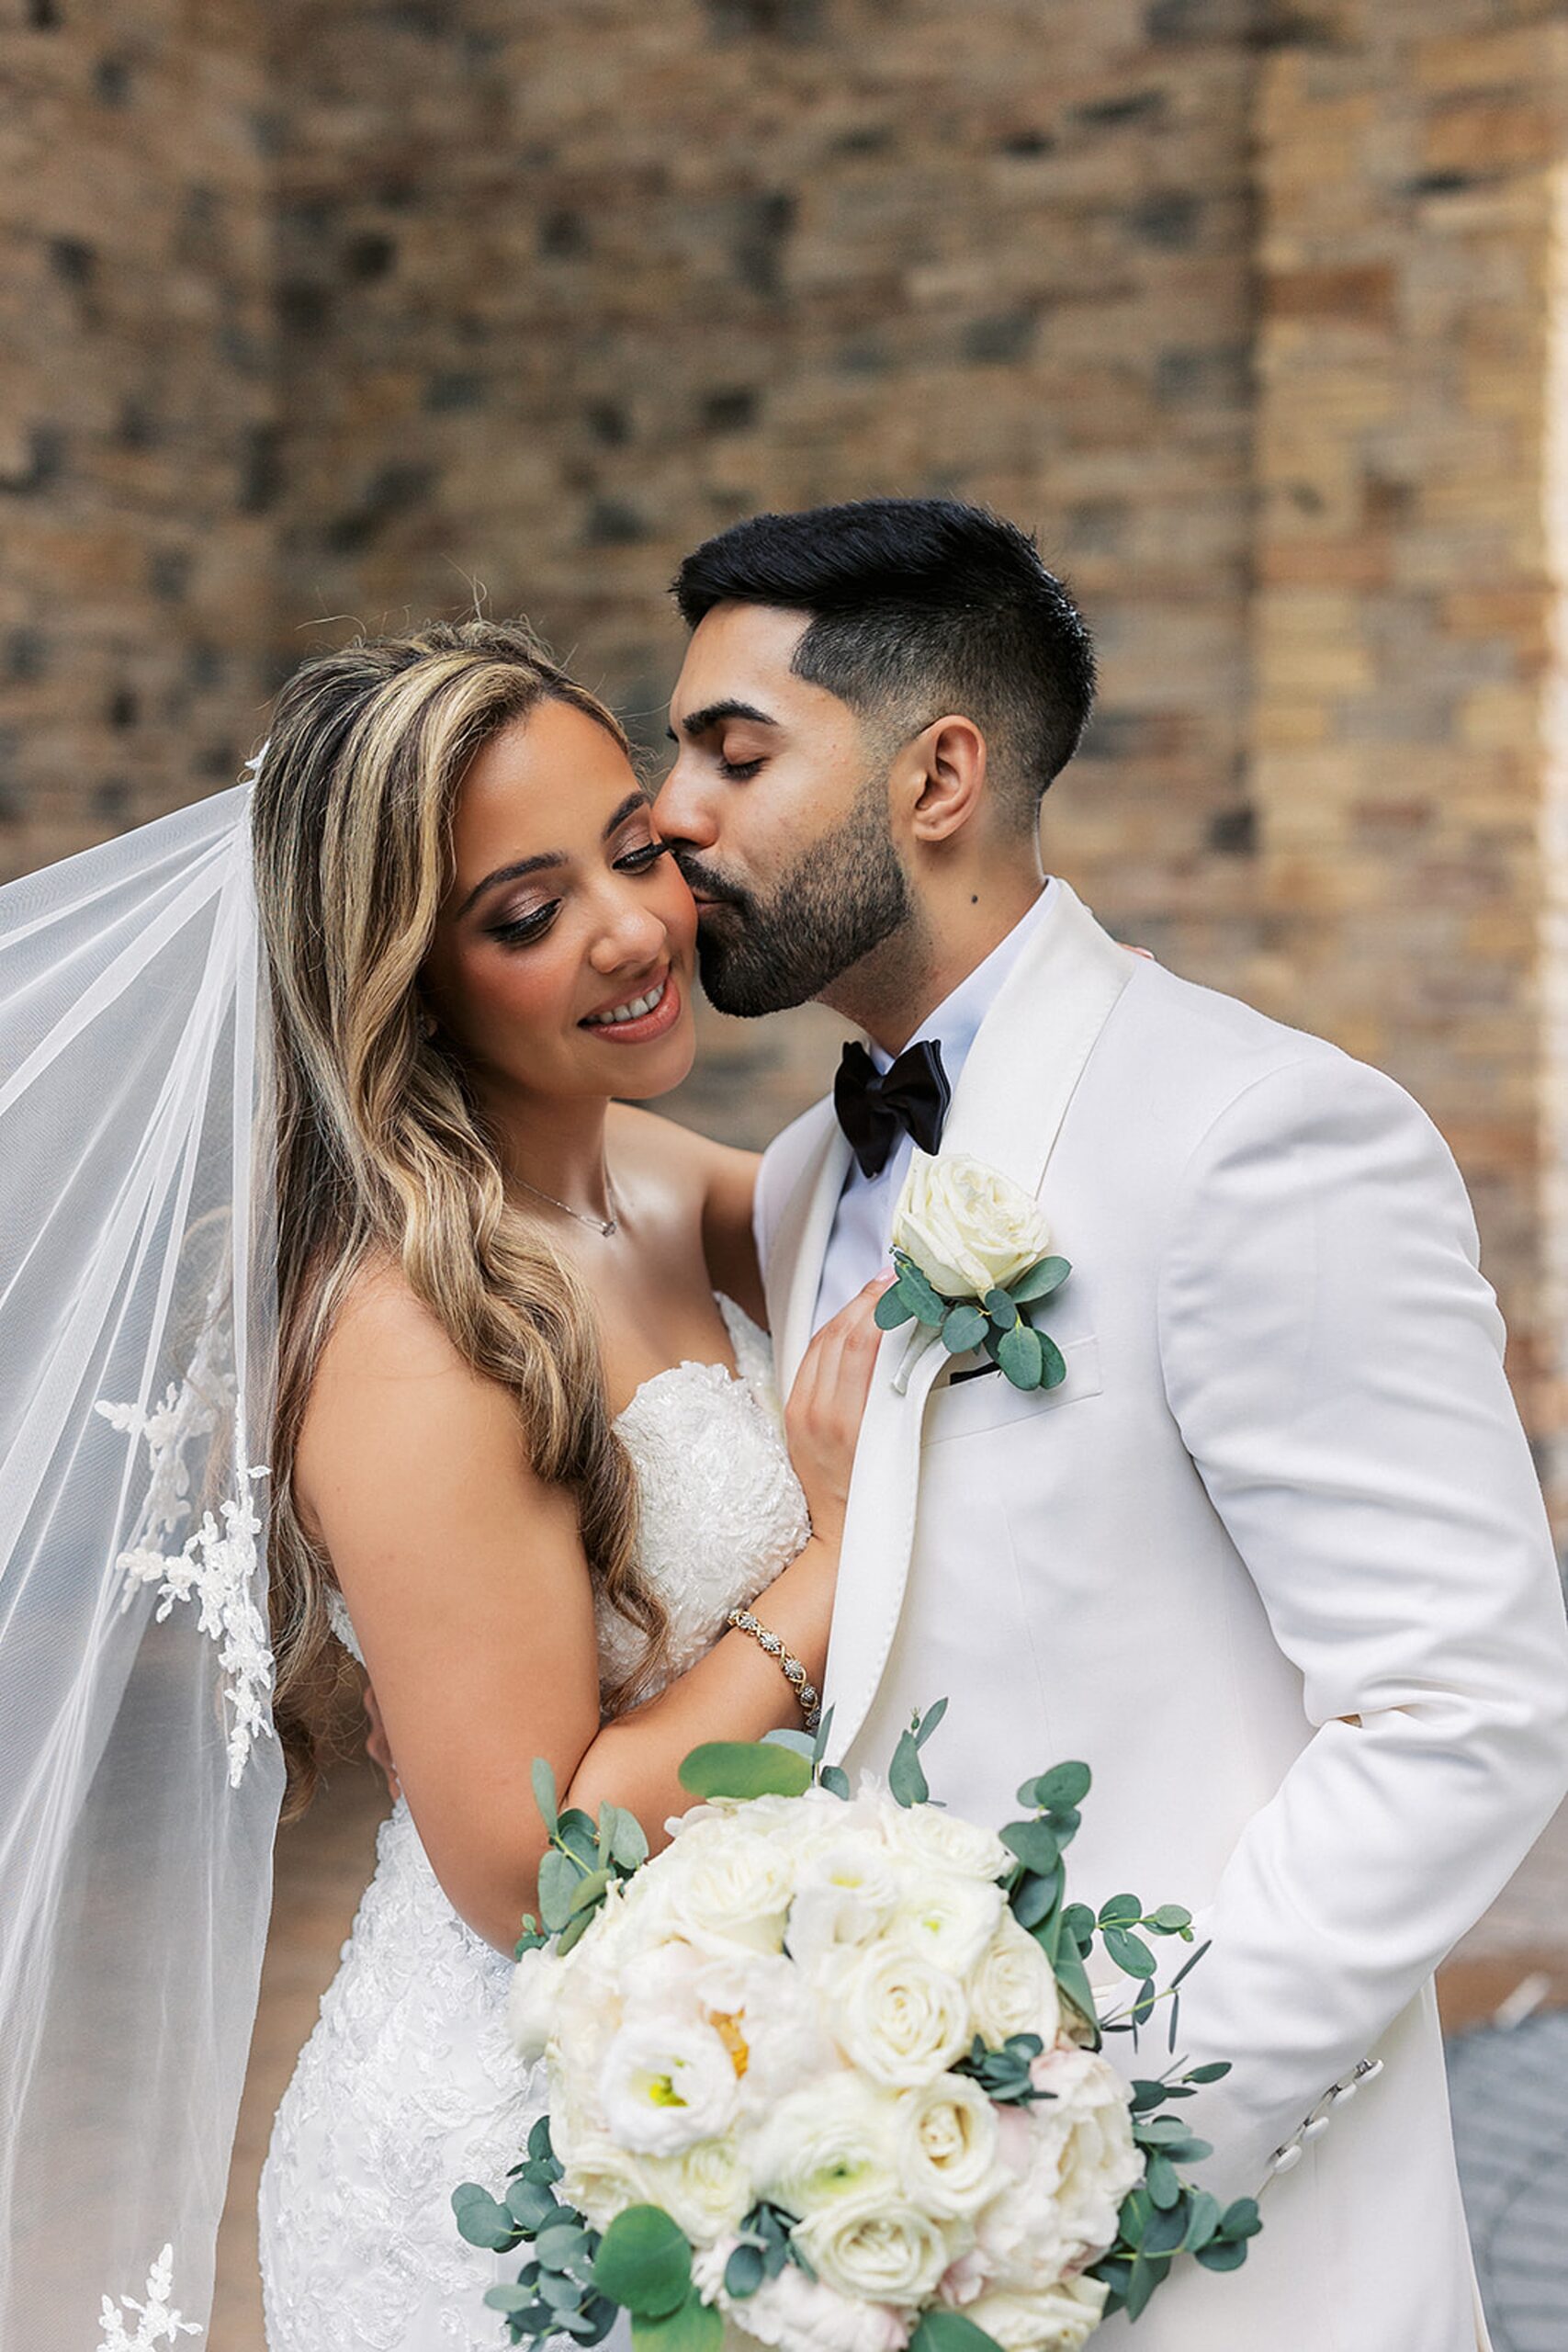 A groom kisses his bride while wearing a white tuxedo jacket and holding her white rose bouquet as her veil flows in the wind at a valley regency wedding